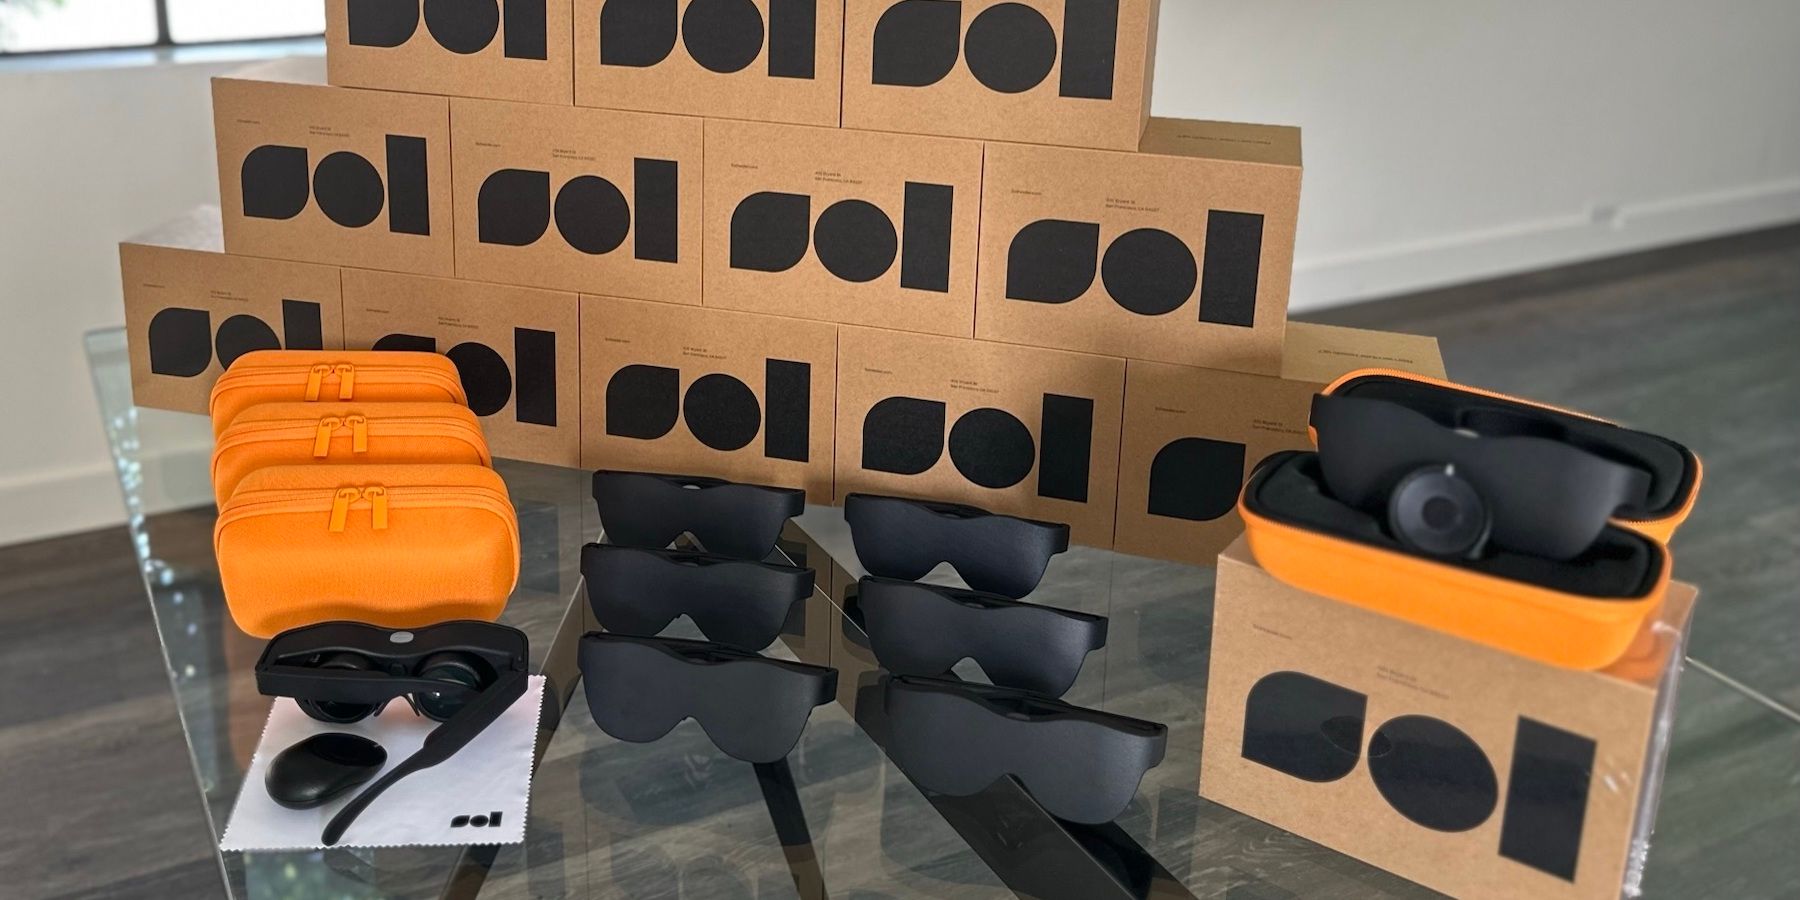 Sol Reader head mounted displays with stacked retail boxes